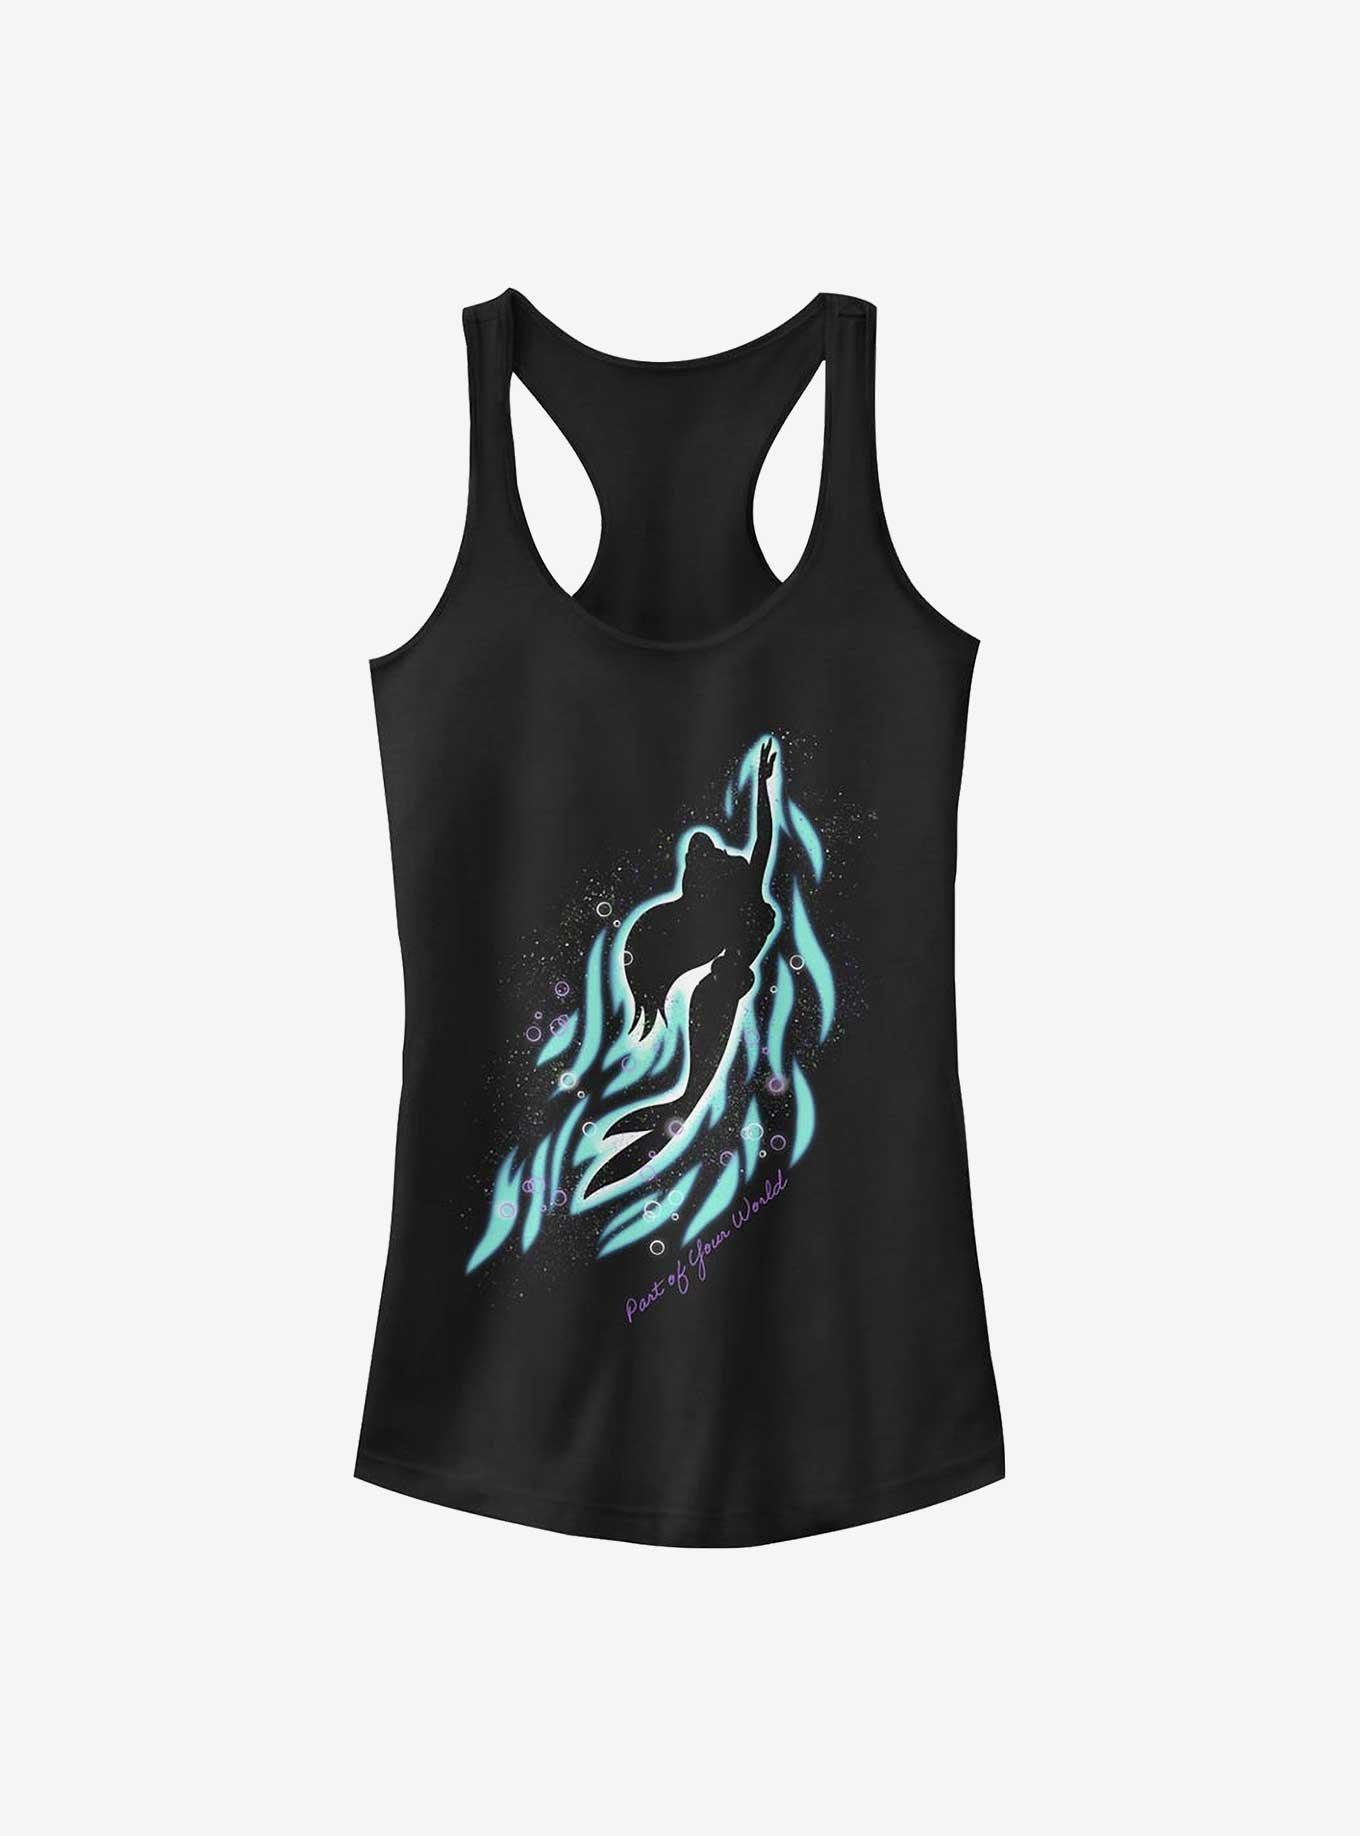 Disney The Little Mermaid Making Waves To Be Part Of Your World Girls Tank, BLACK, hi-res